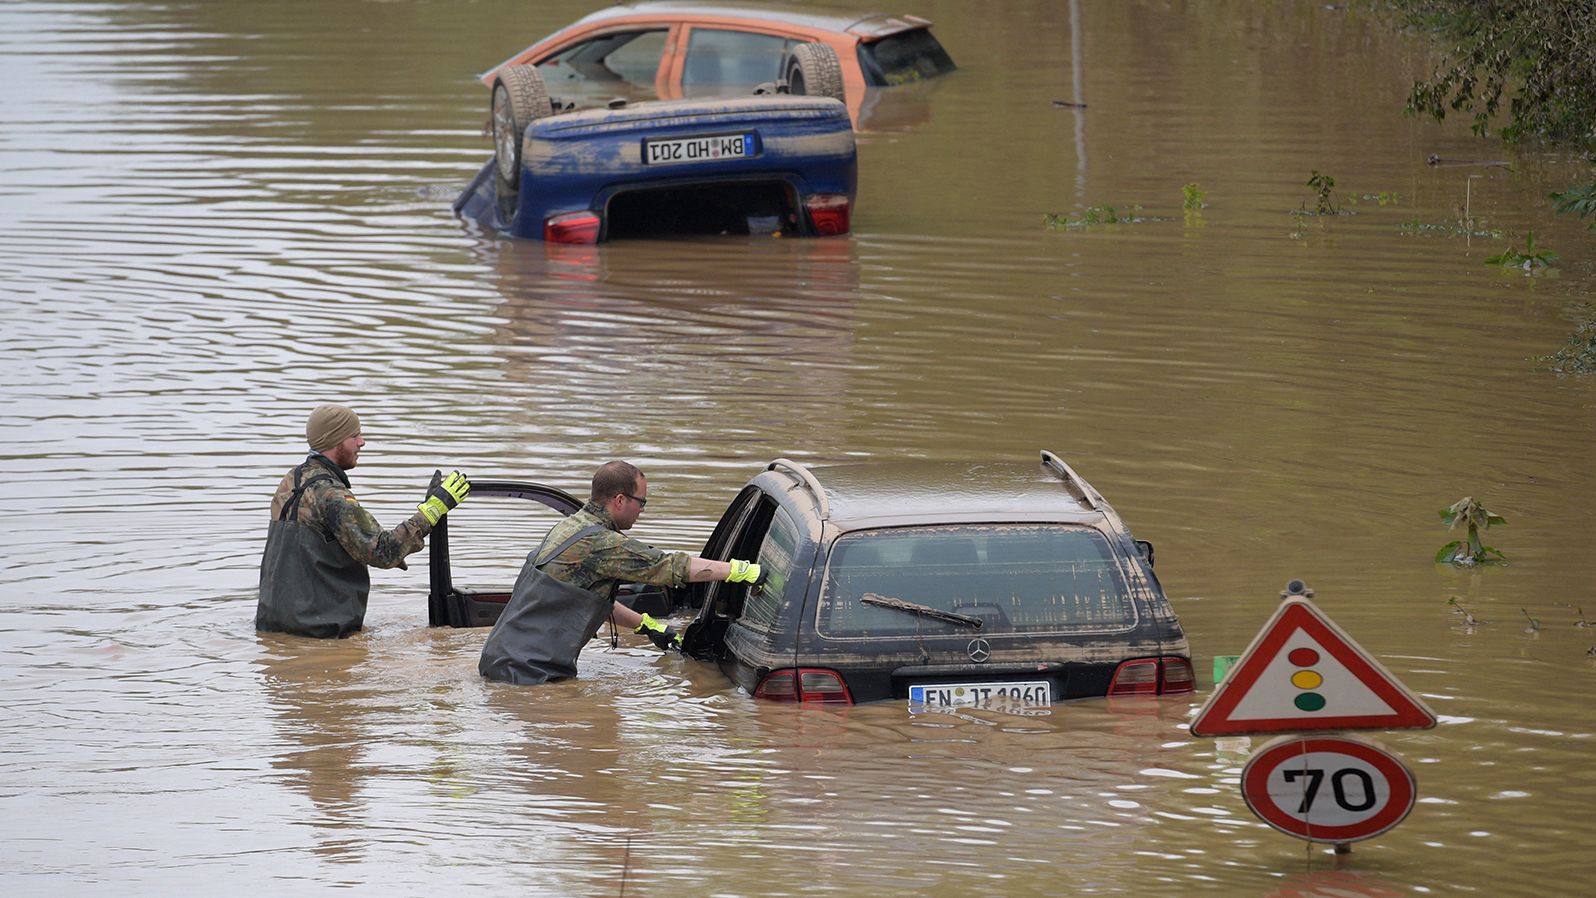 Members of the German armed forces search for flood victims in Erftstadt, Germany, on Saturday.